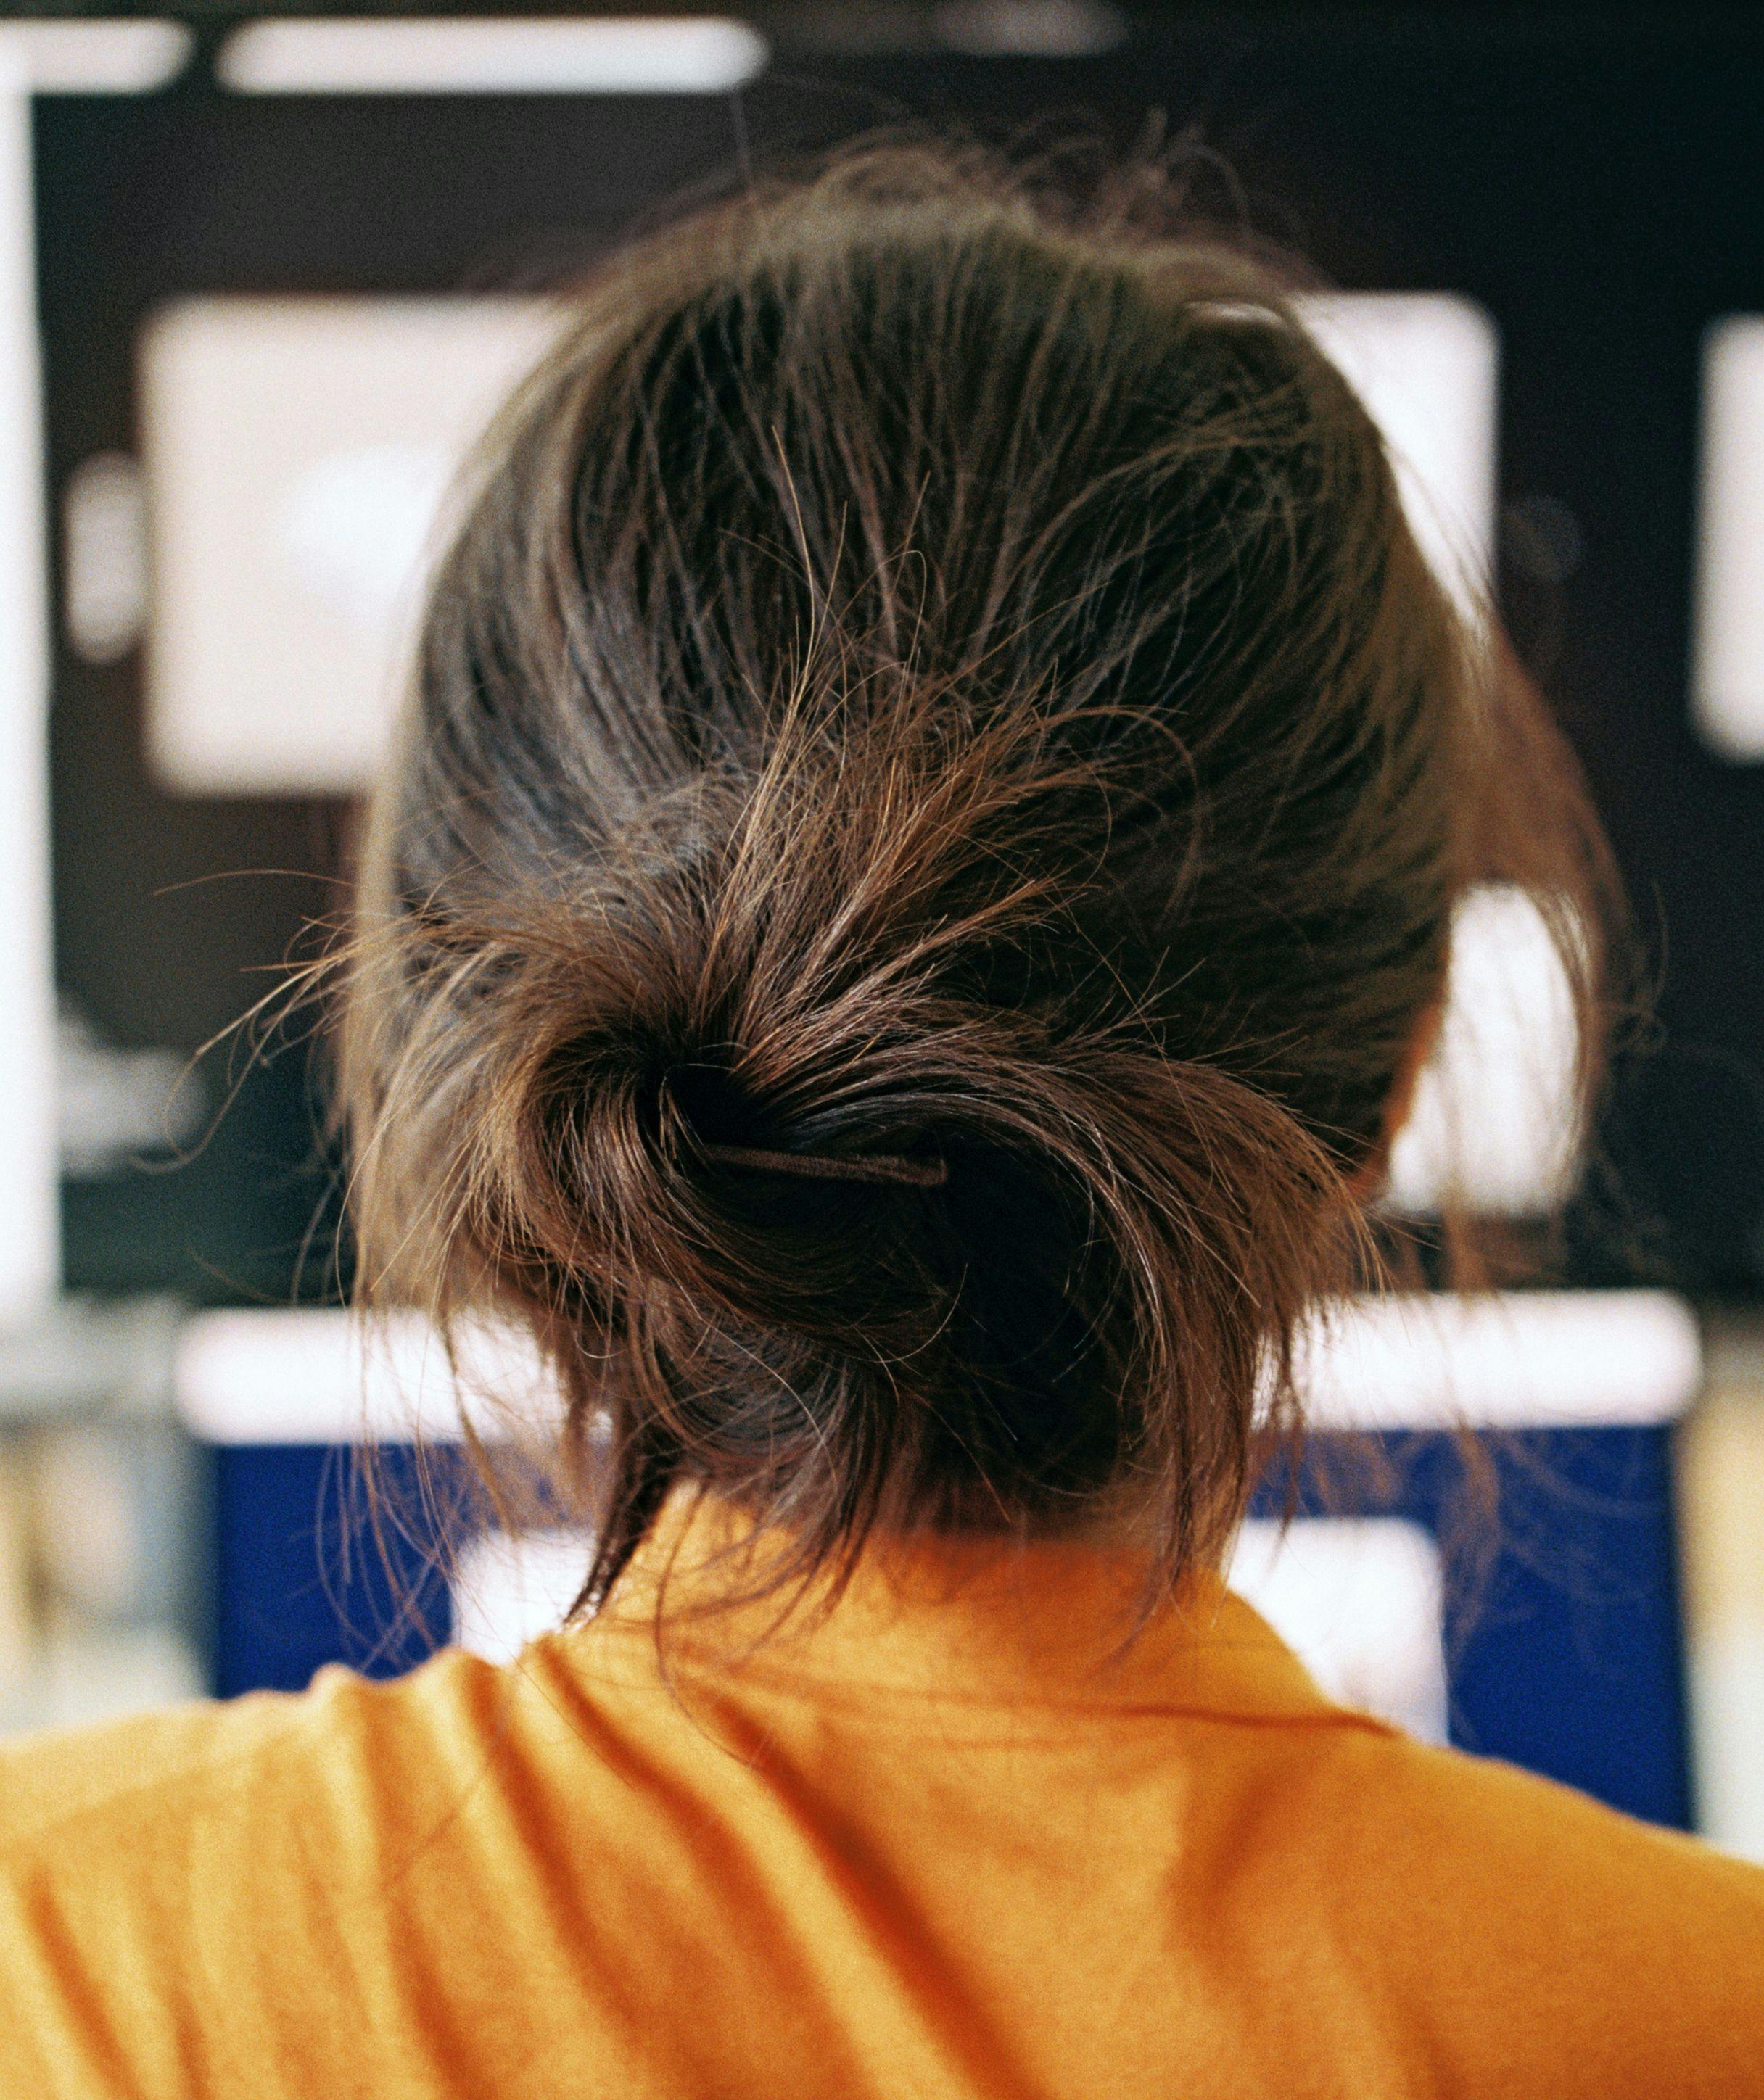 Close-up of a woman's hair from behind